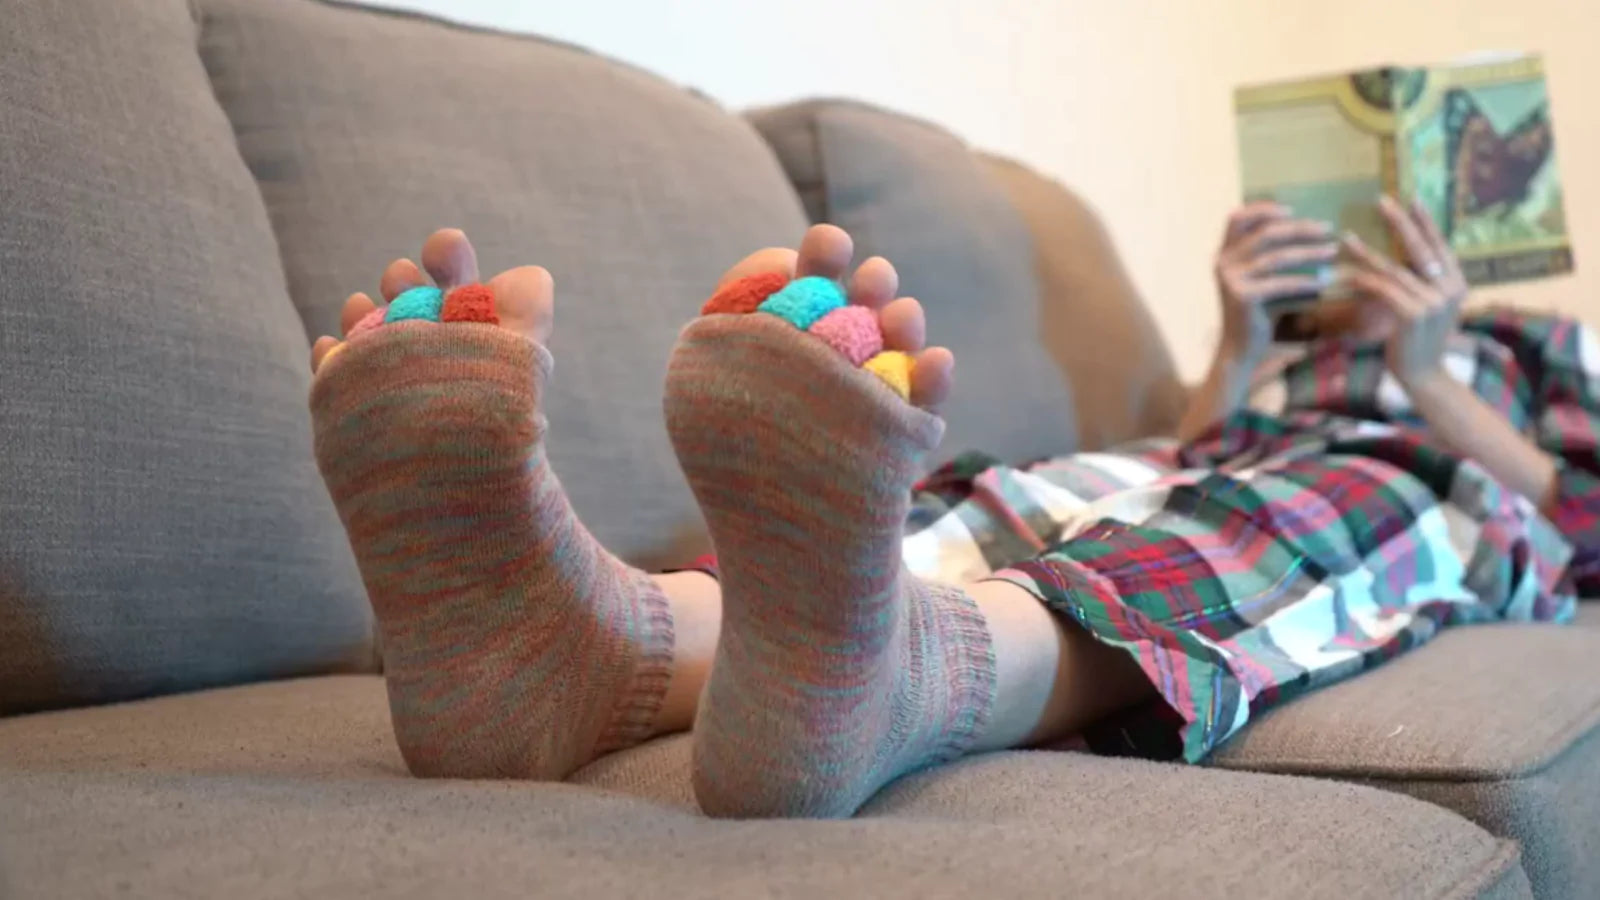 Finally, Relieve Your Foot Pain for GOOD With These Revolutionary New "Miracle Socks"